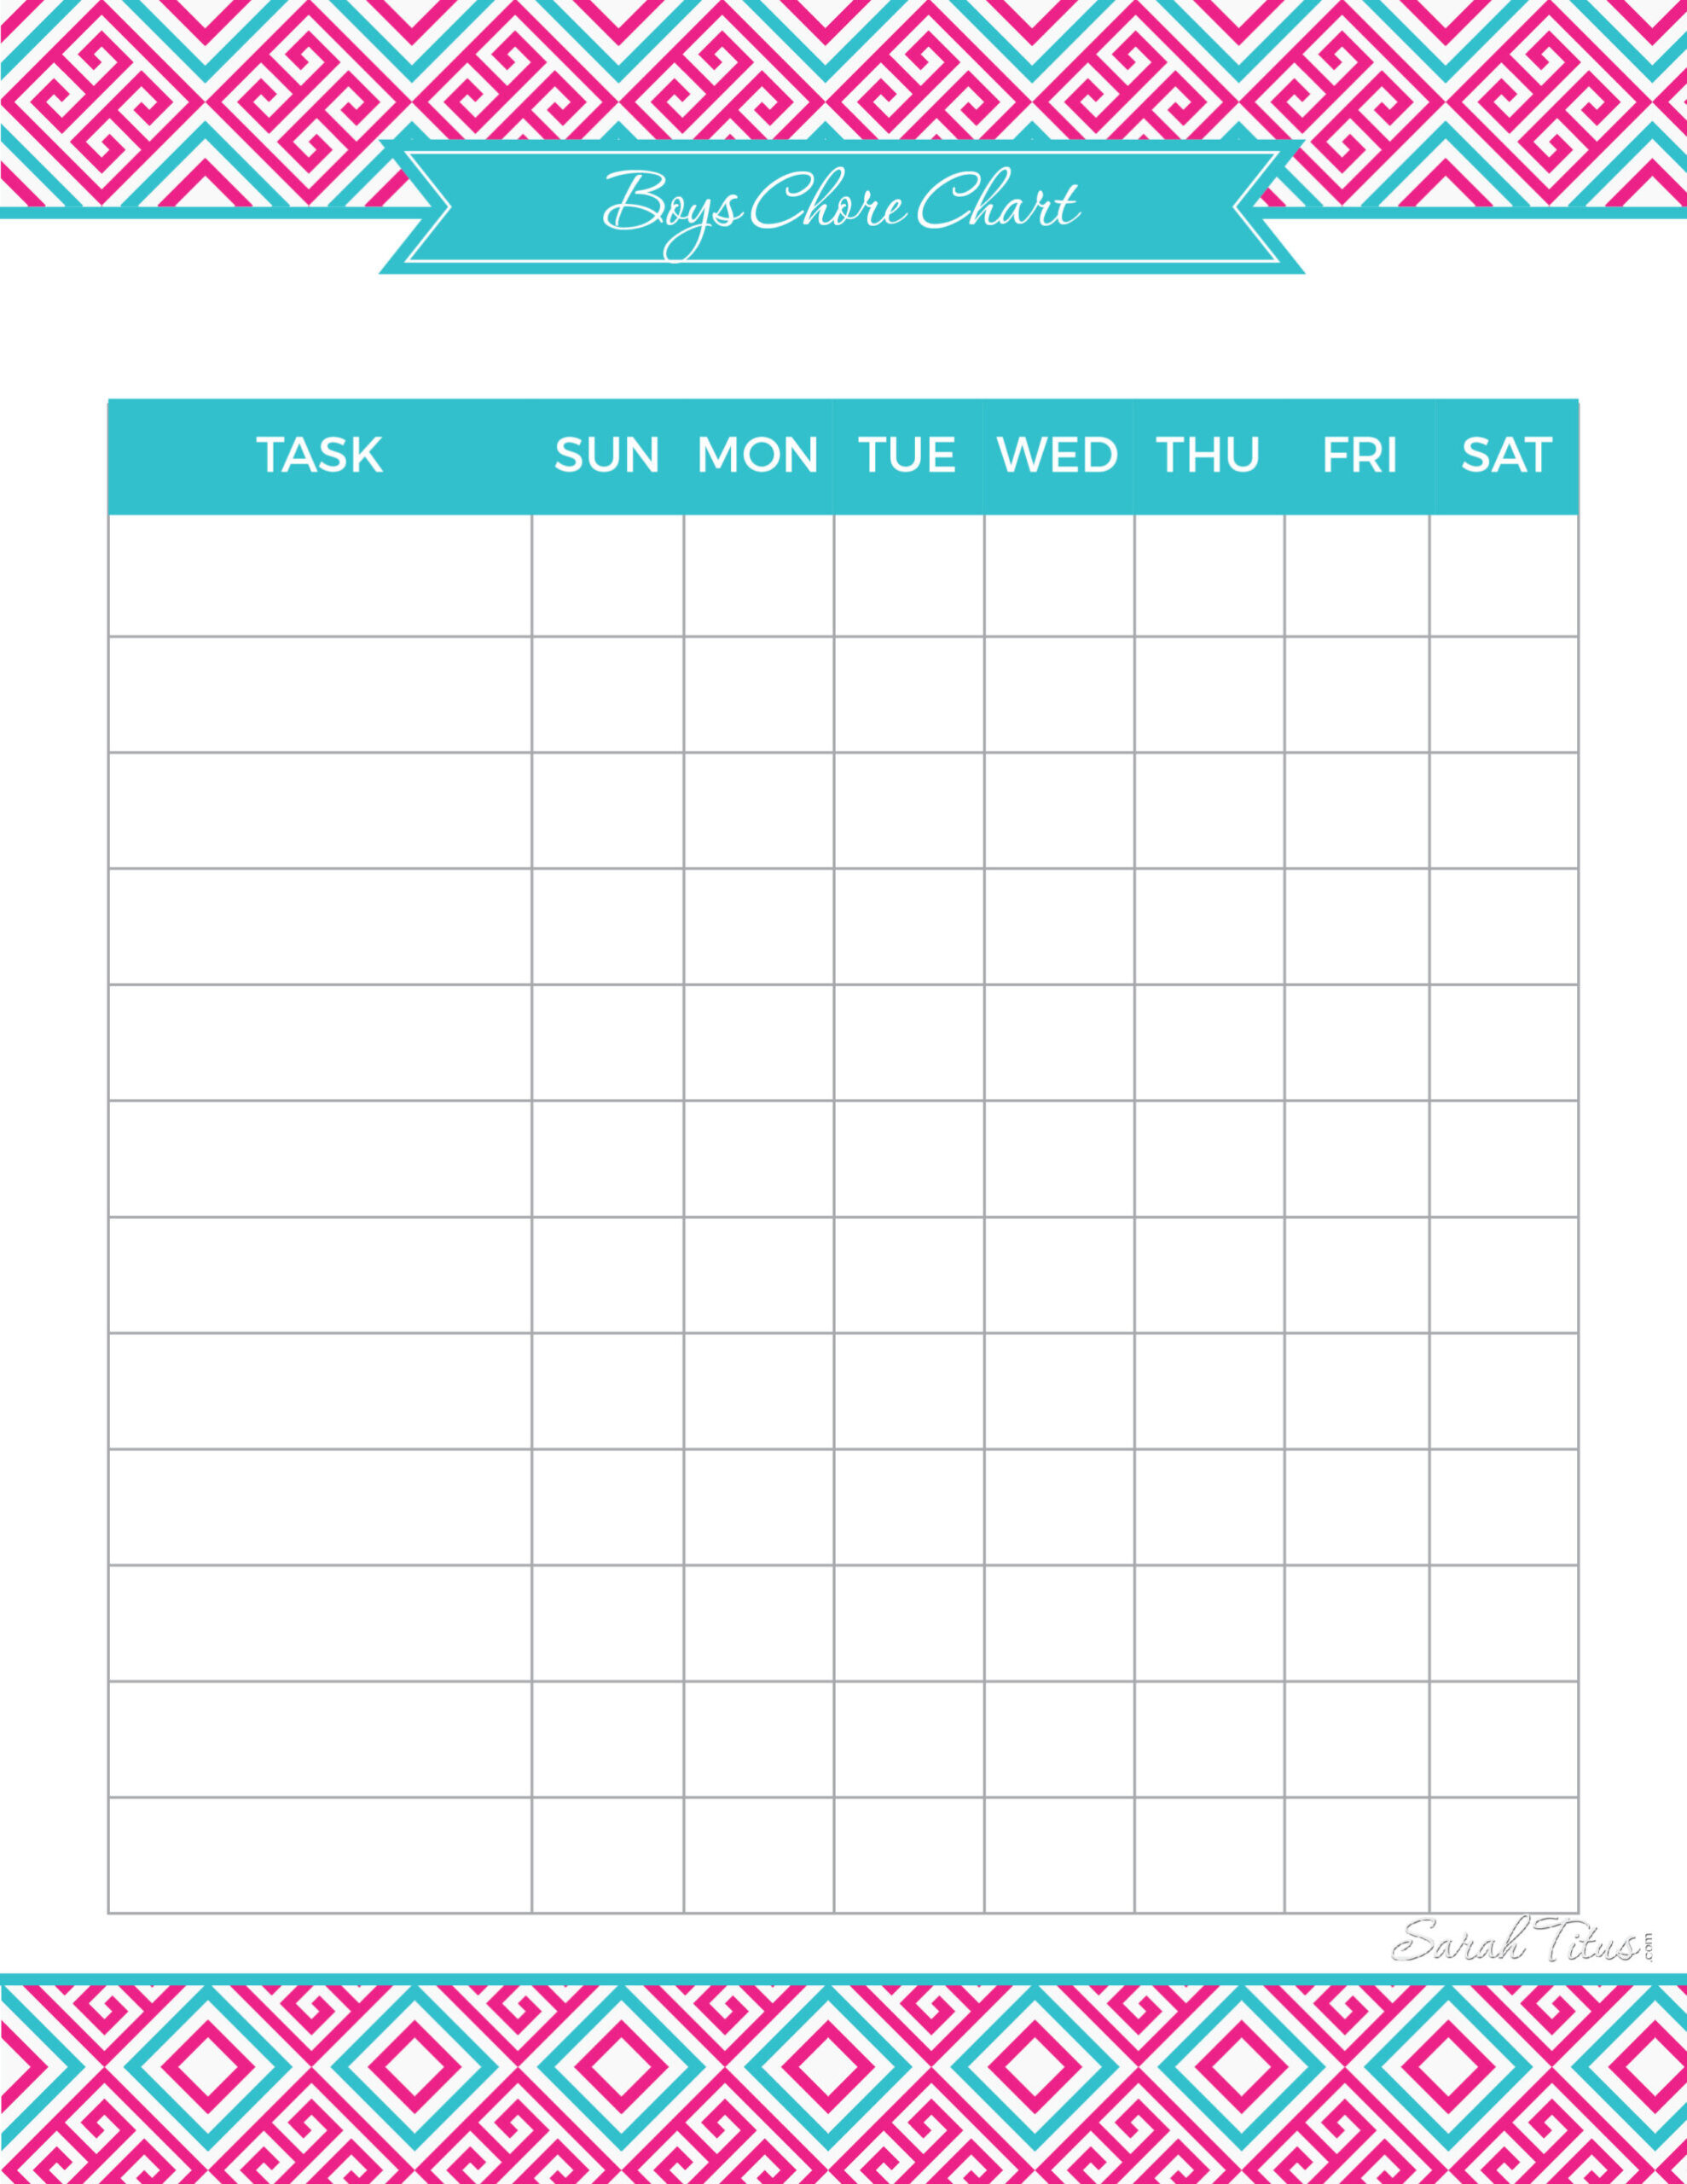 Creating A Chore Chart That Is Right For You - Sarah Titus